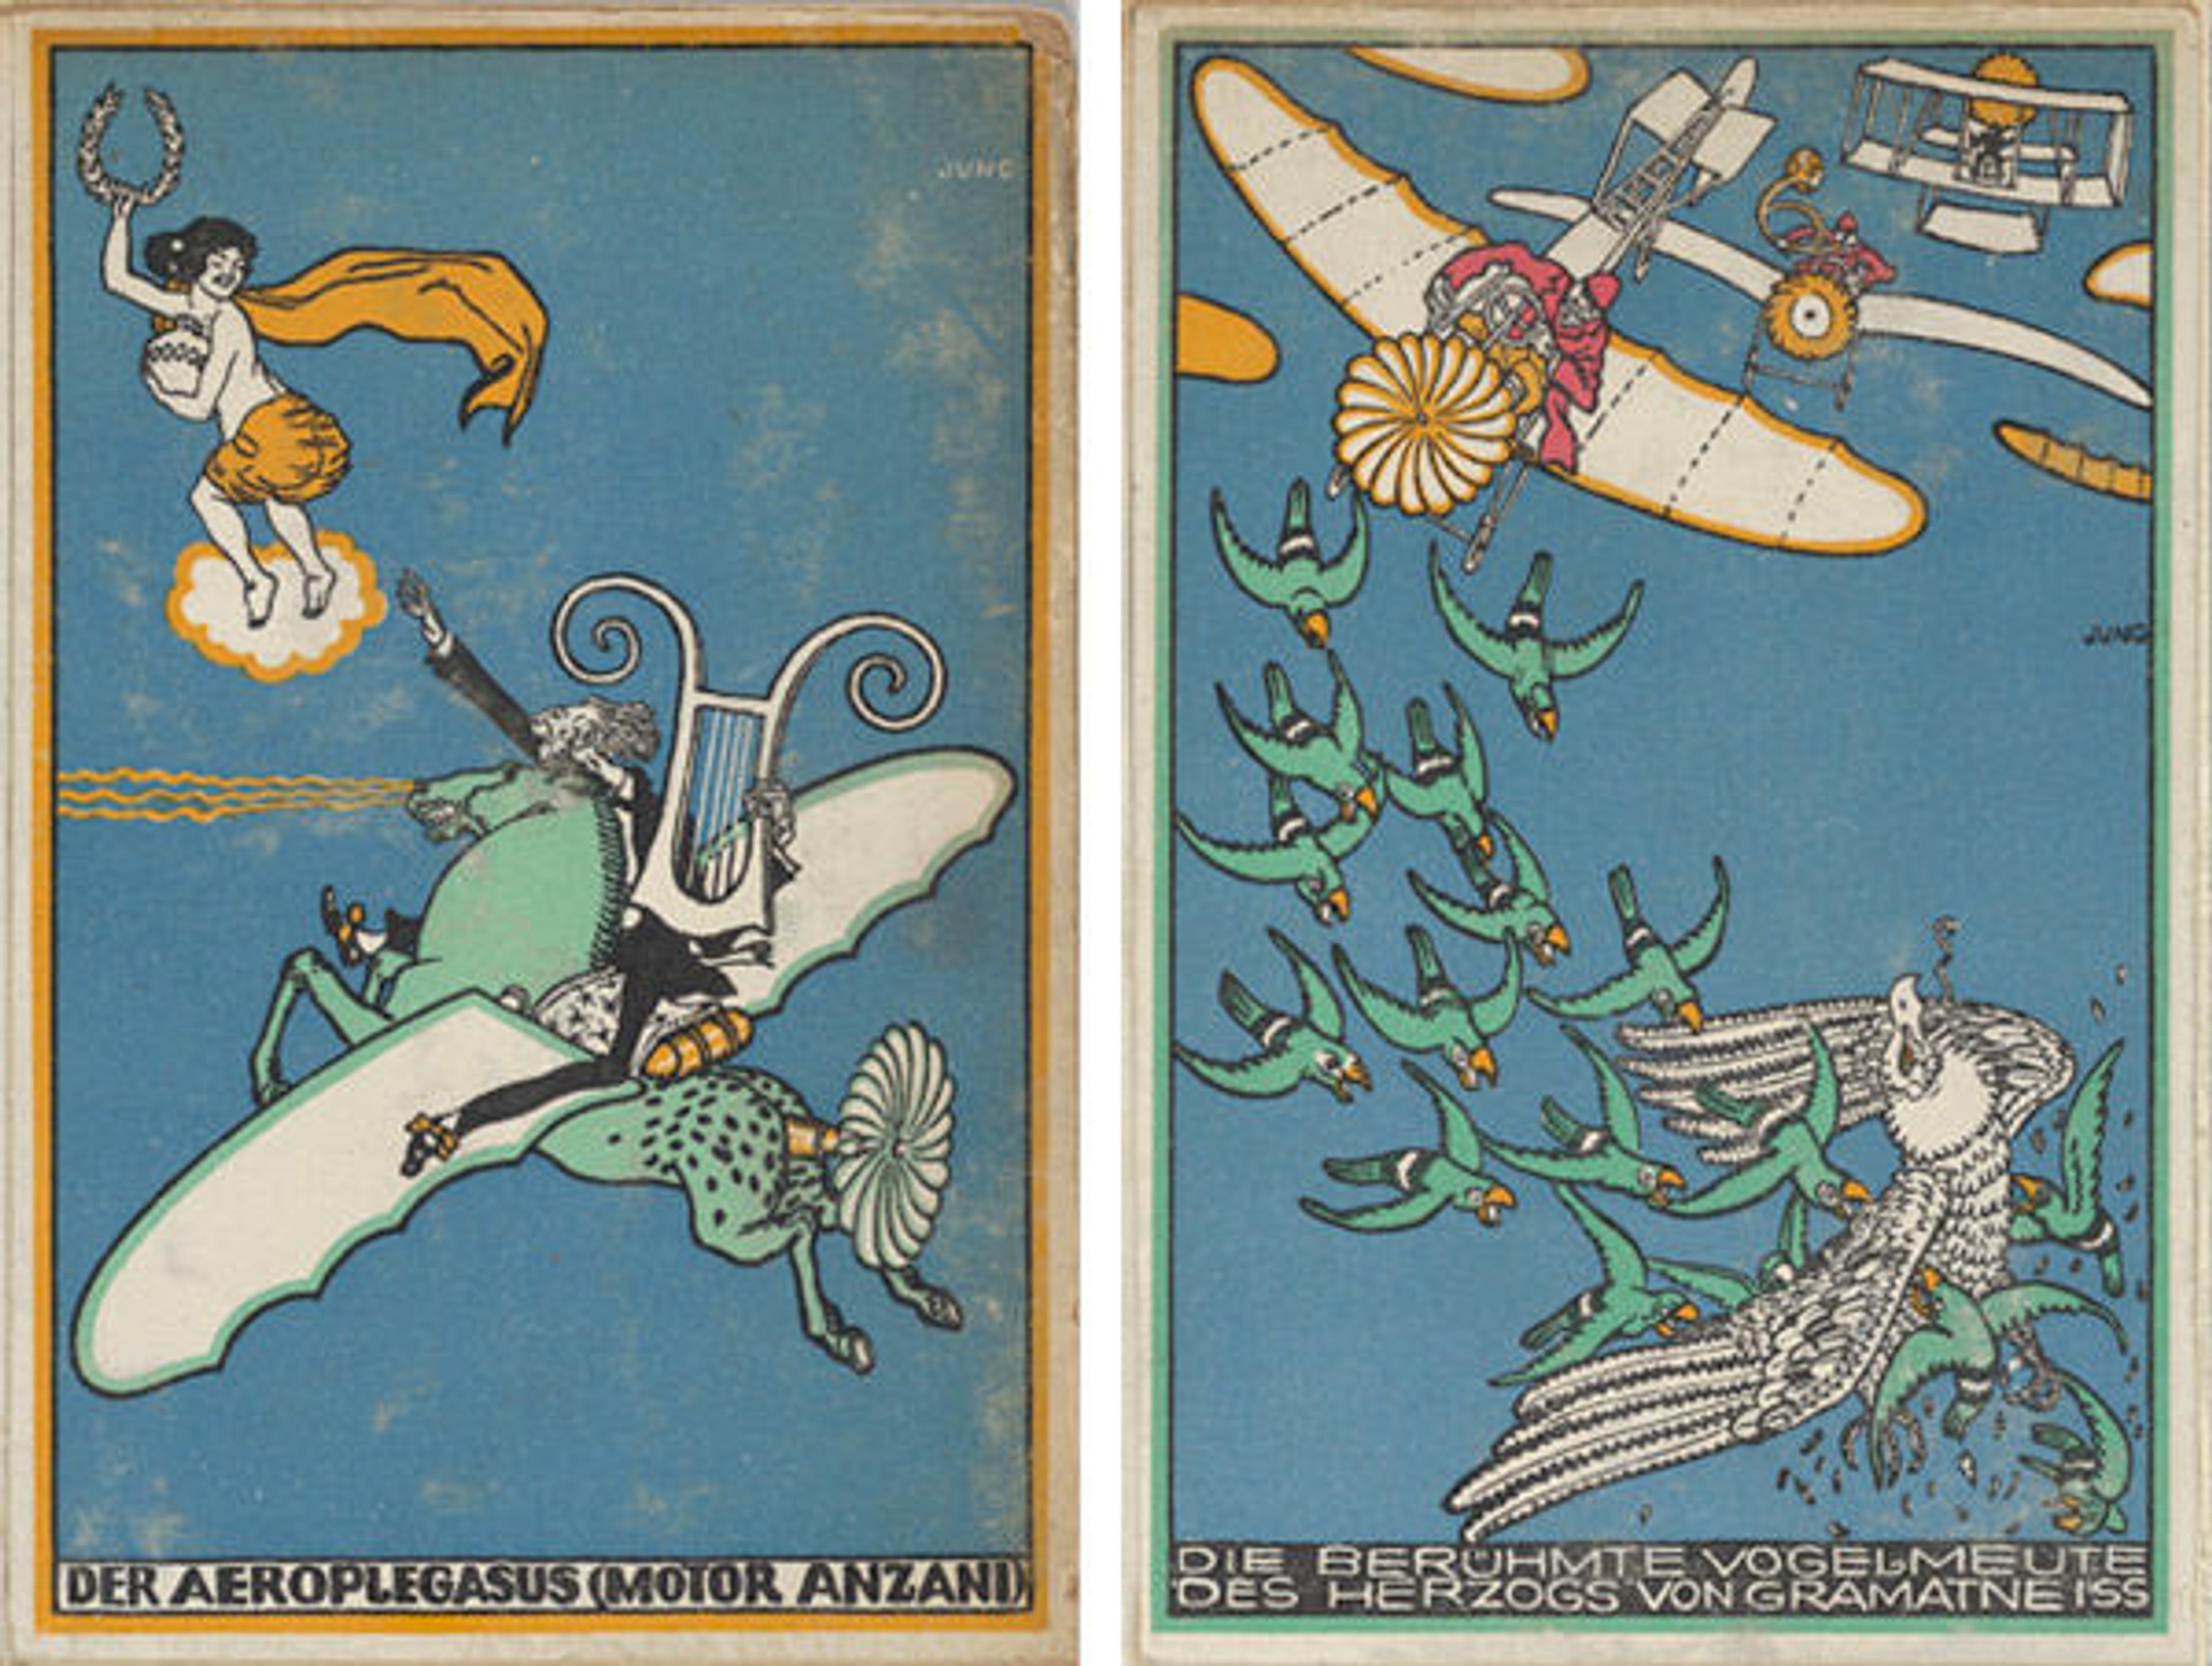 Left: The Aeroplegasus (Anzani Engines). Right: The Duke of Gramatneiss's Famous Pack of Birds